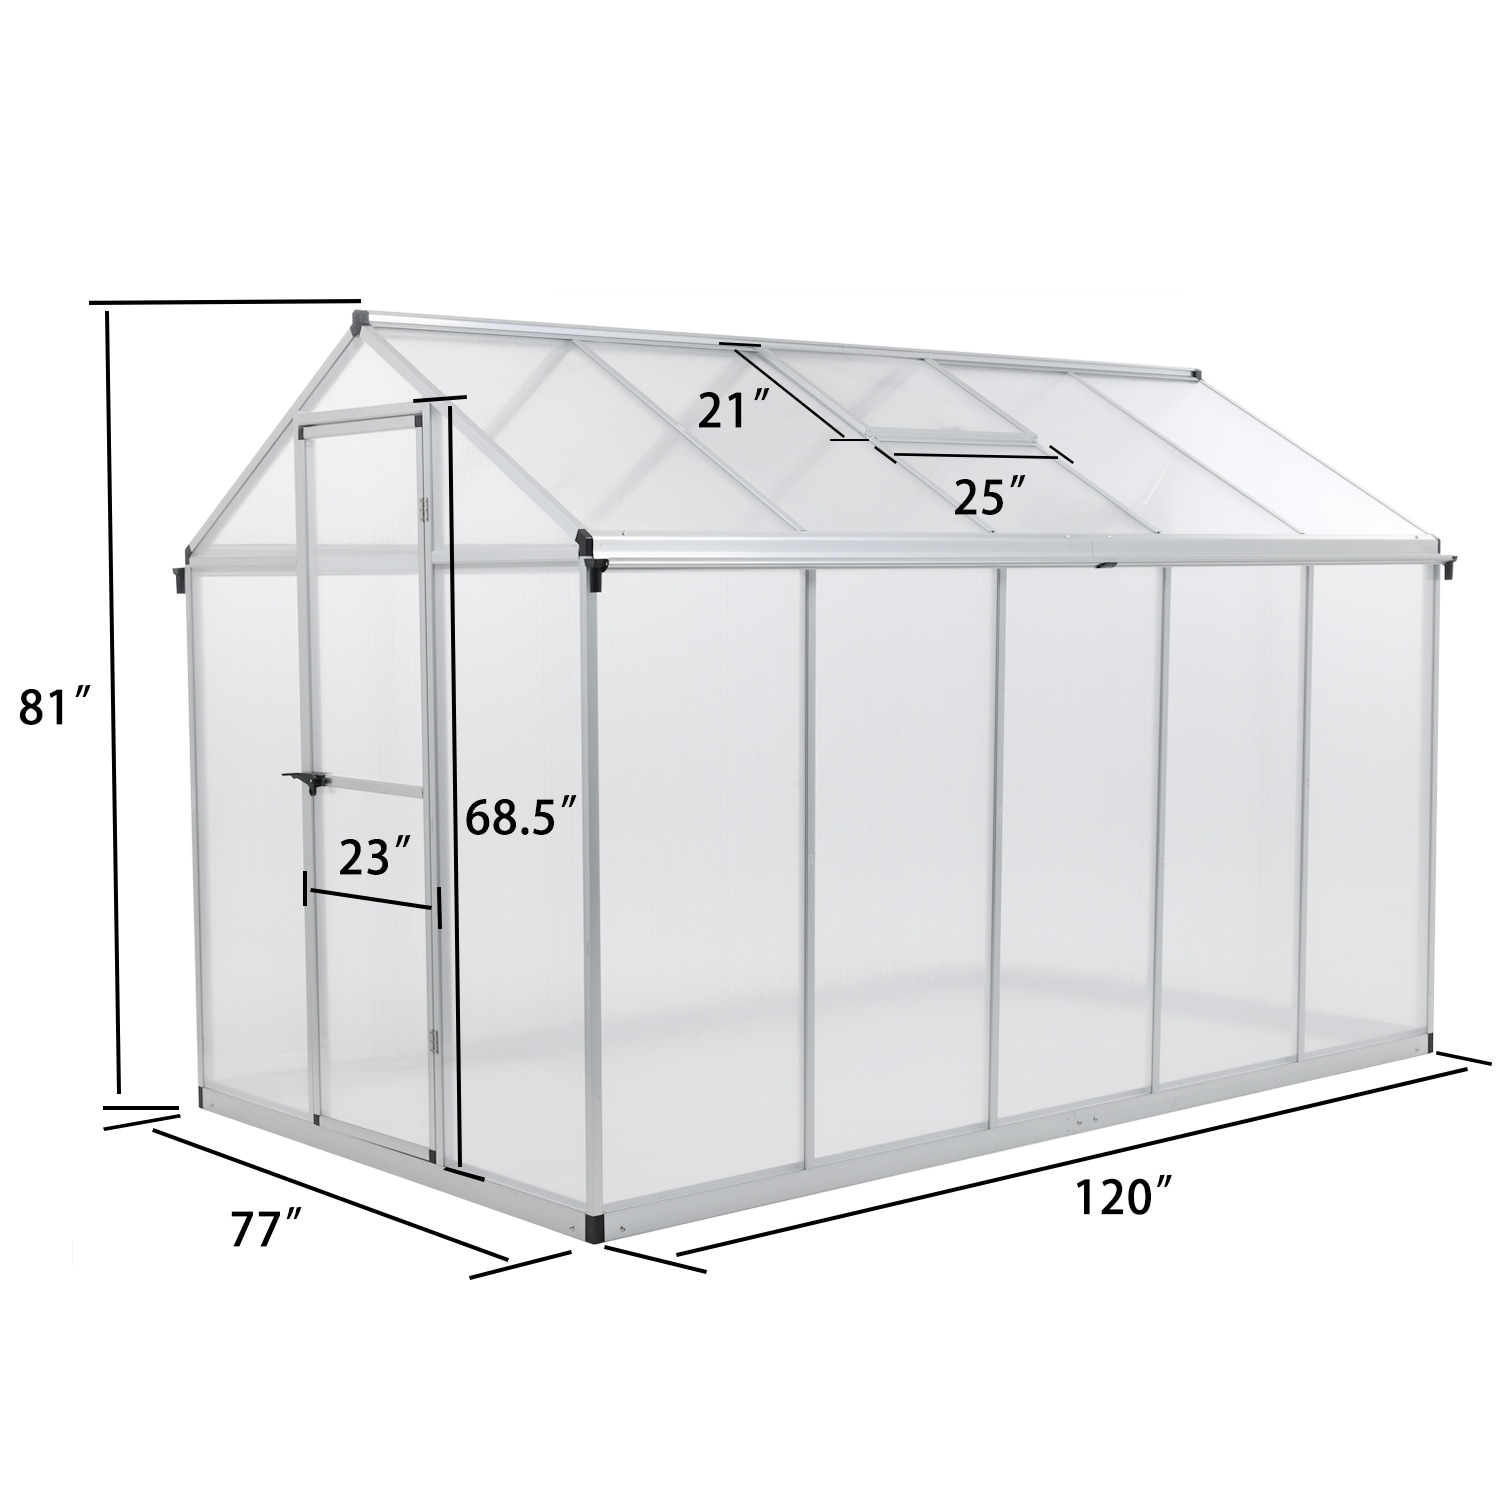 Aoodor 6' x 10' Walk-in Greenhouse Polycarbonate Panel Hobby Greenhouses